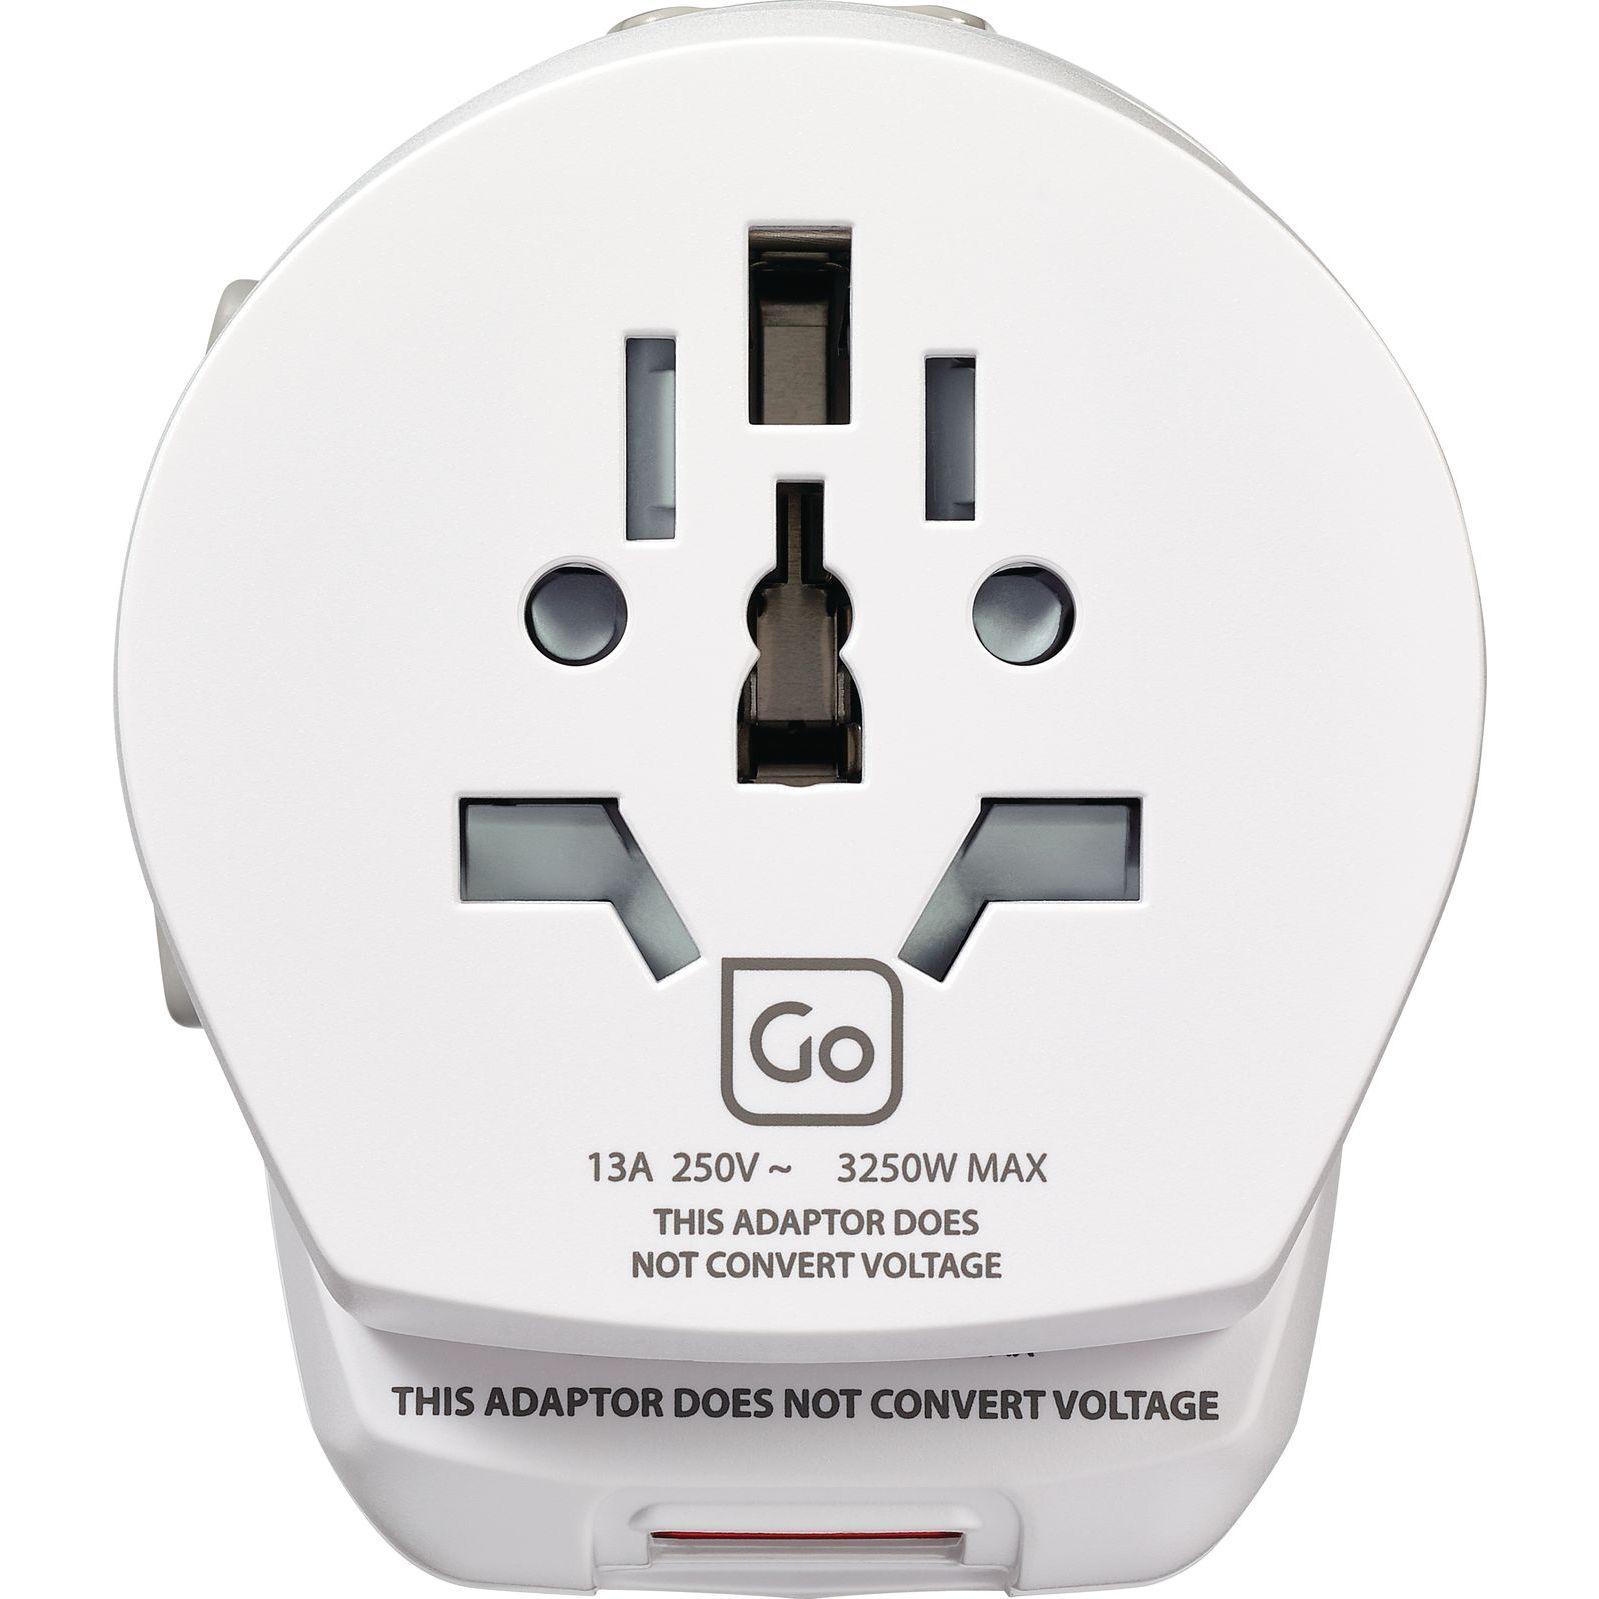 Go Travel Worldwide-uk Adaptor And Usb in White for Men Mens Bags Luggage and suitcases 